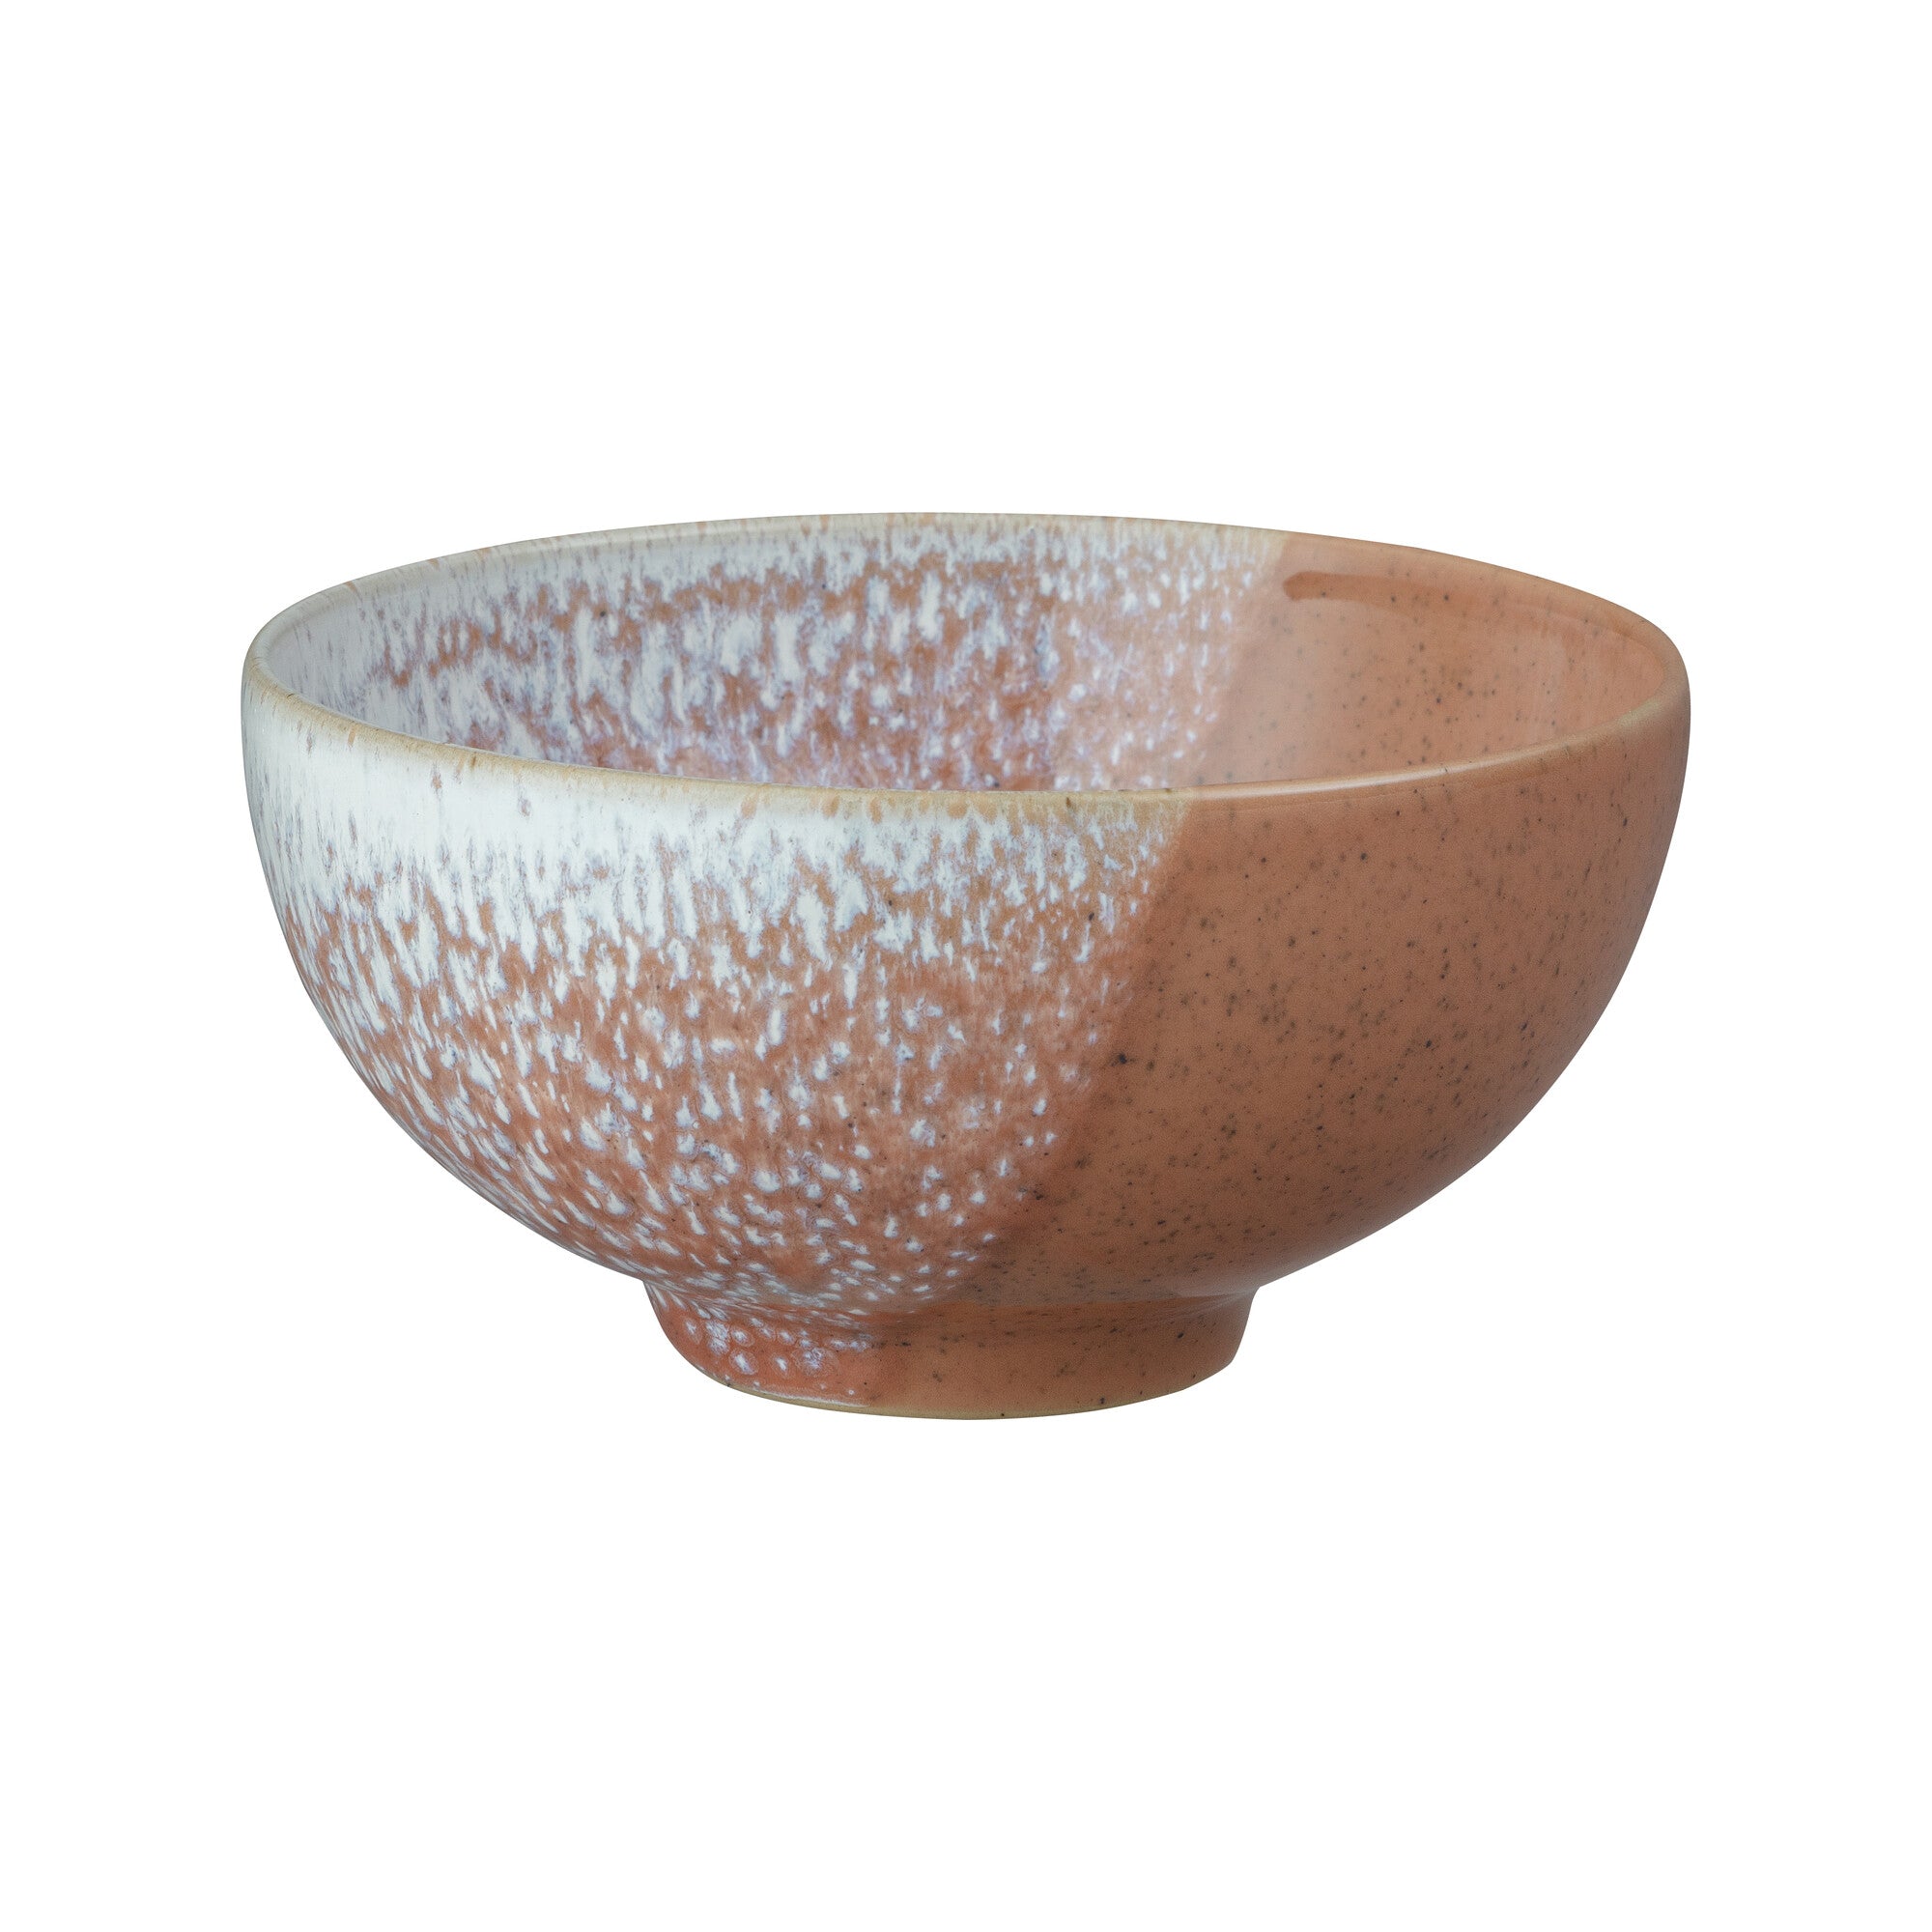 Denby Kiln Accents Rust Rice Bowl